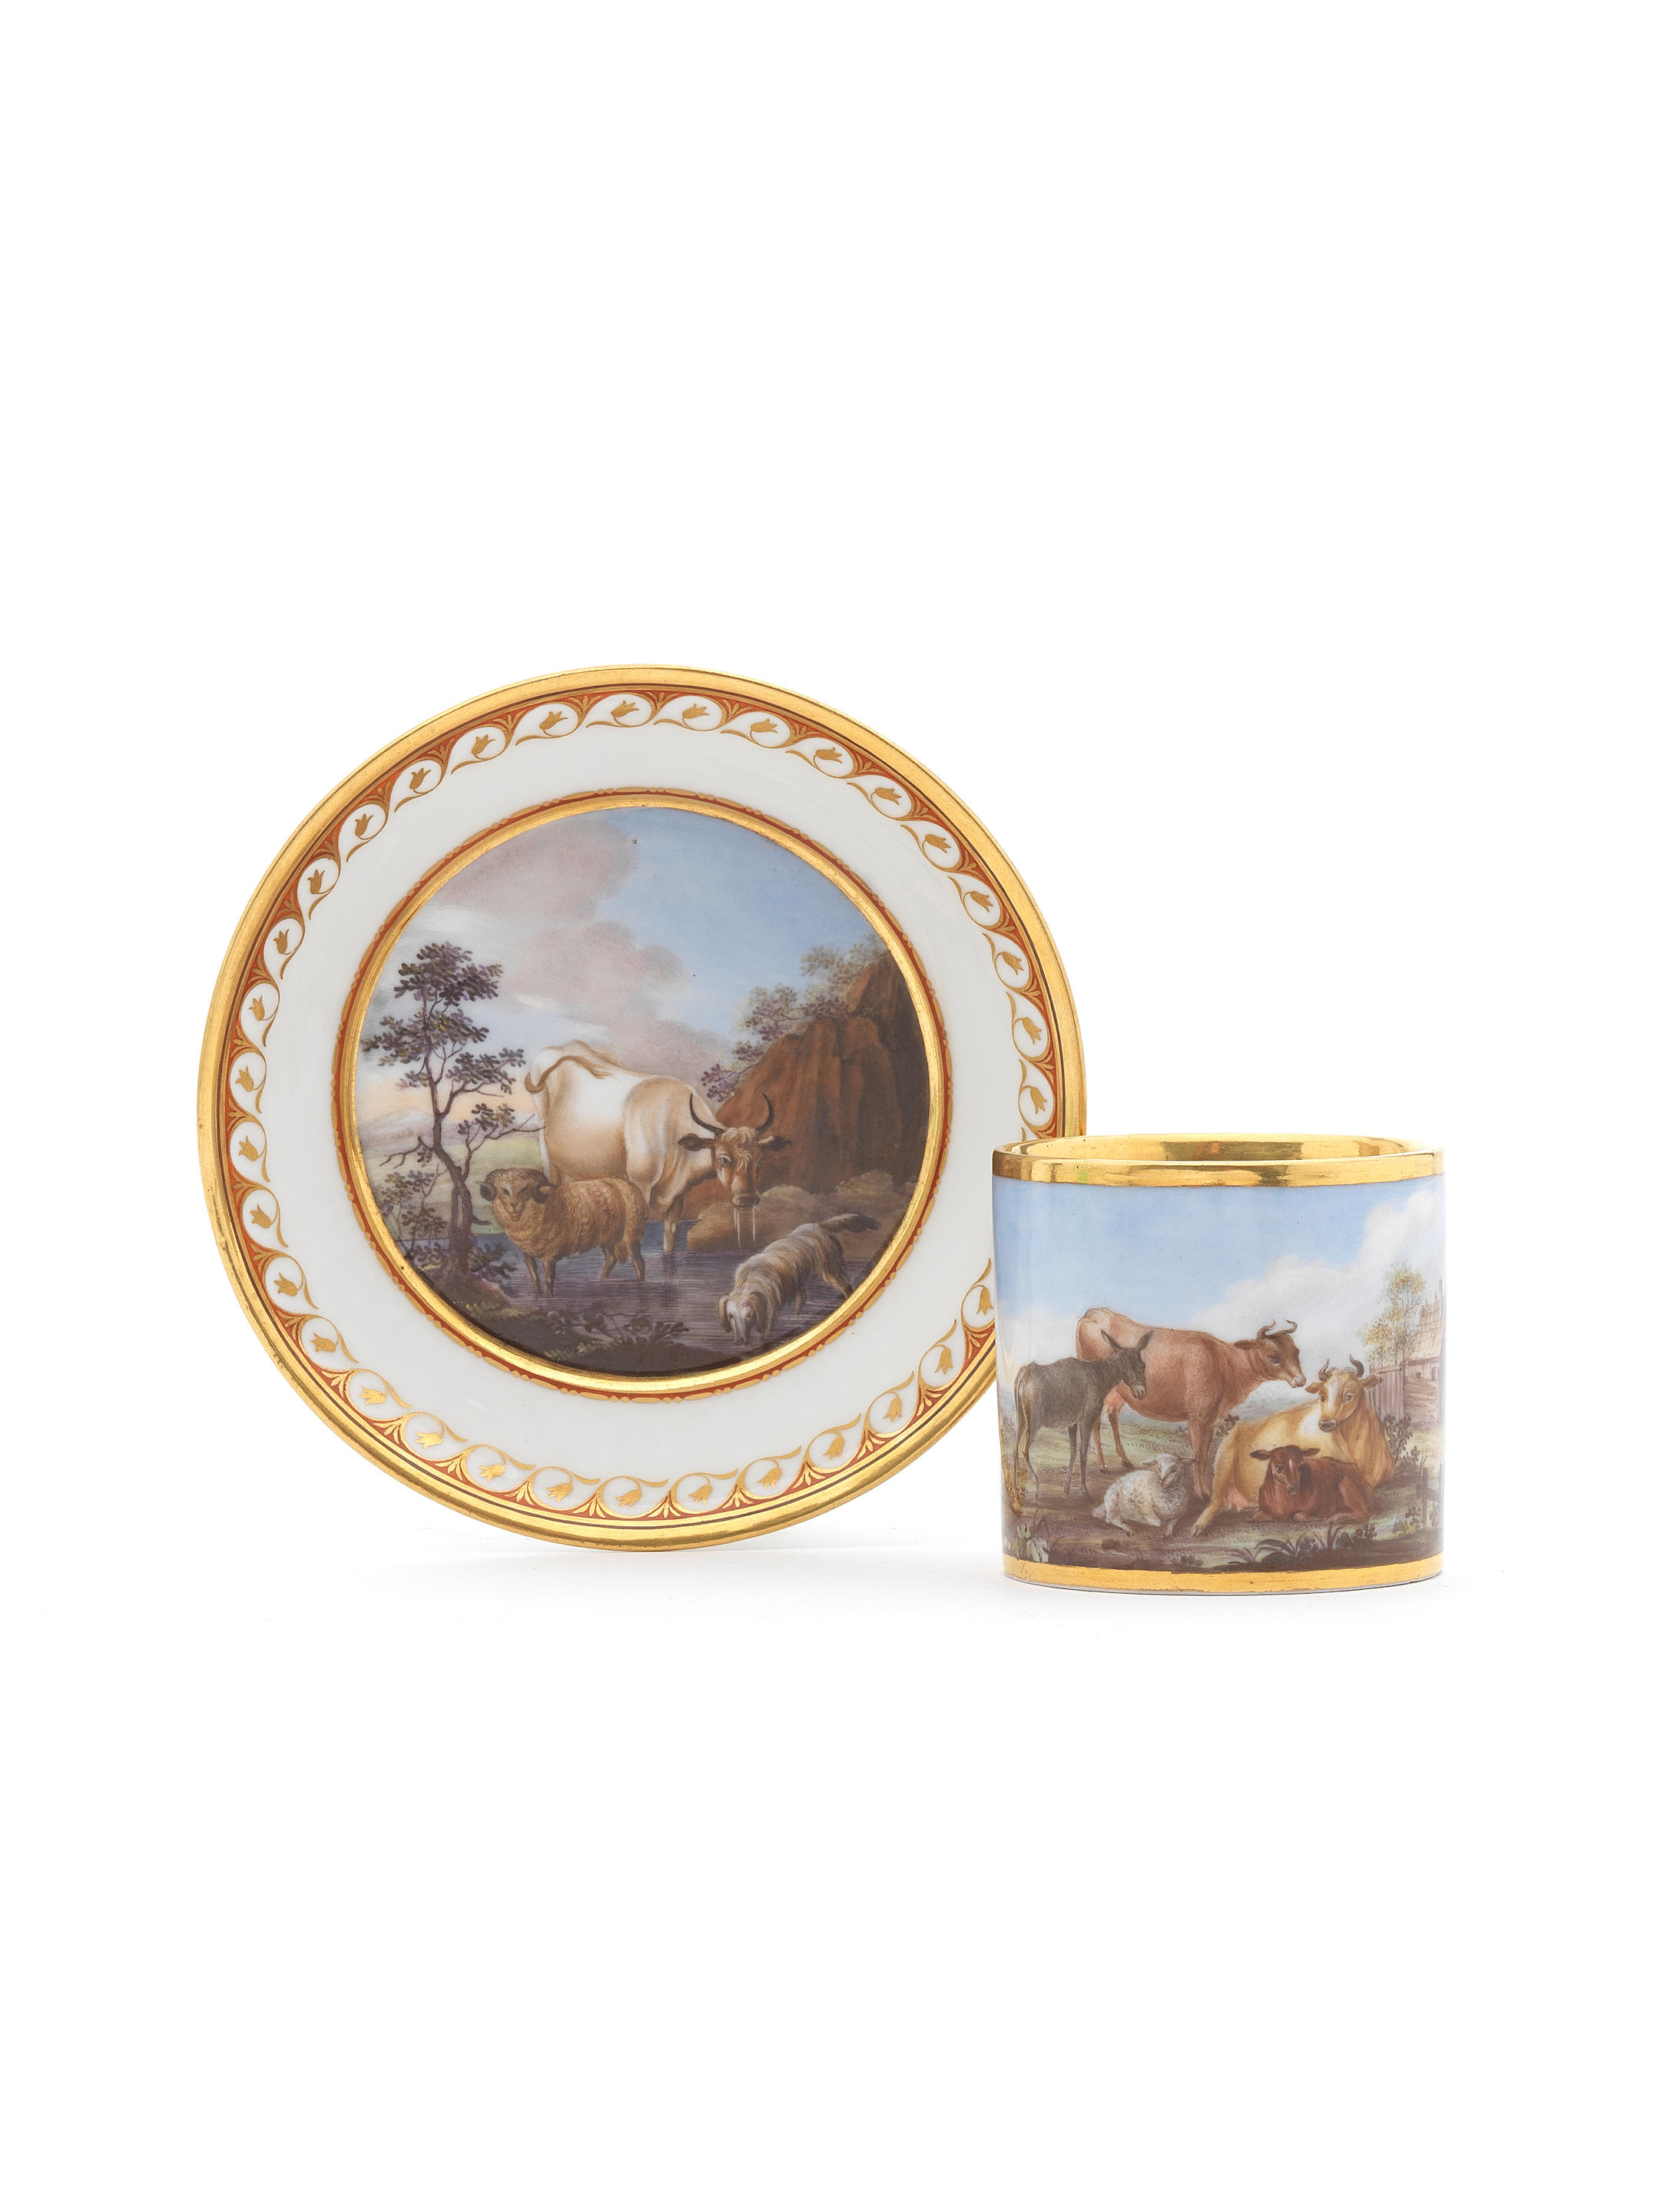 A Berlin coffee can and saucer, circa 1803-13